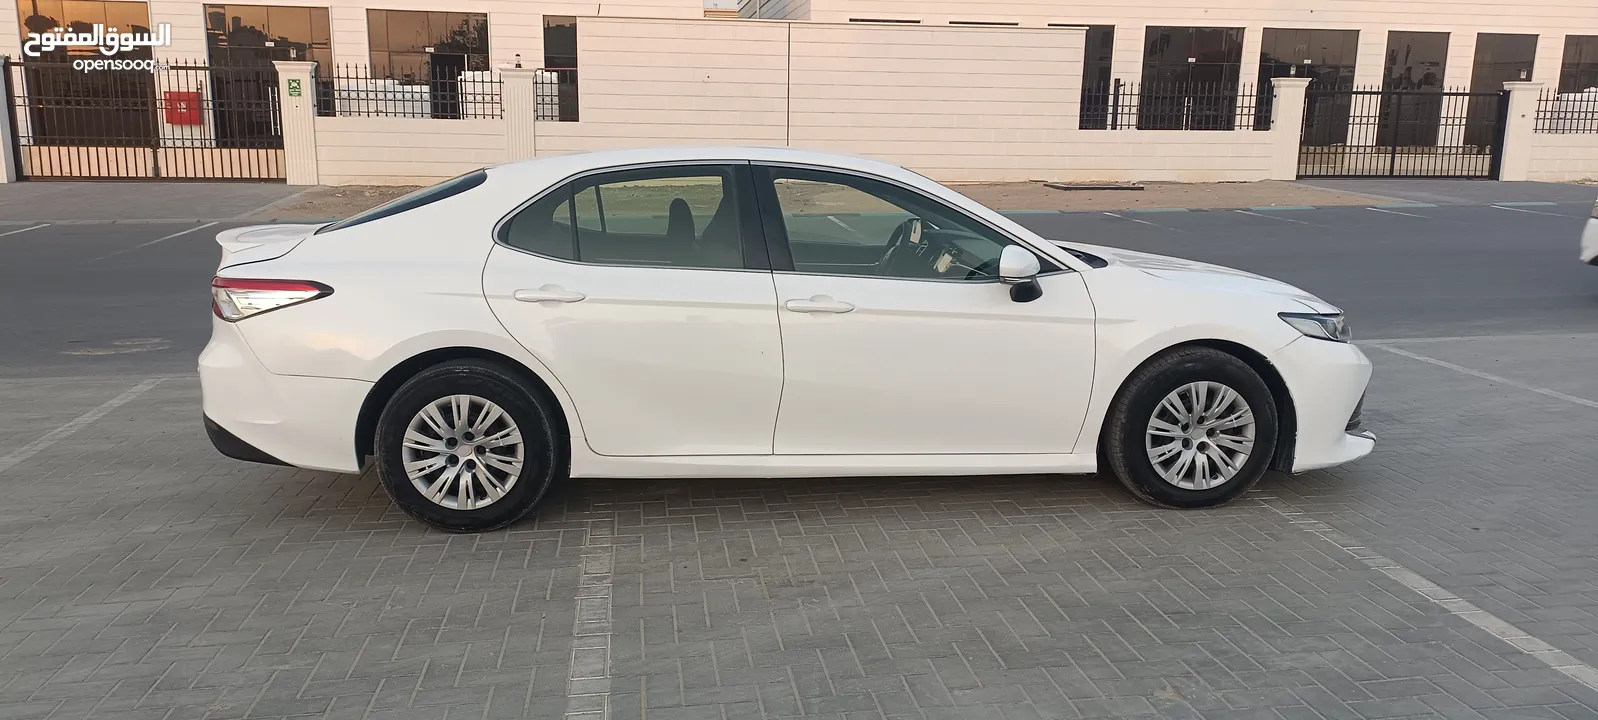 Toyota Camry 2018 rear camera everything thing is perfect no issues for sale location Al Ain